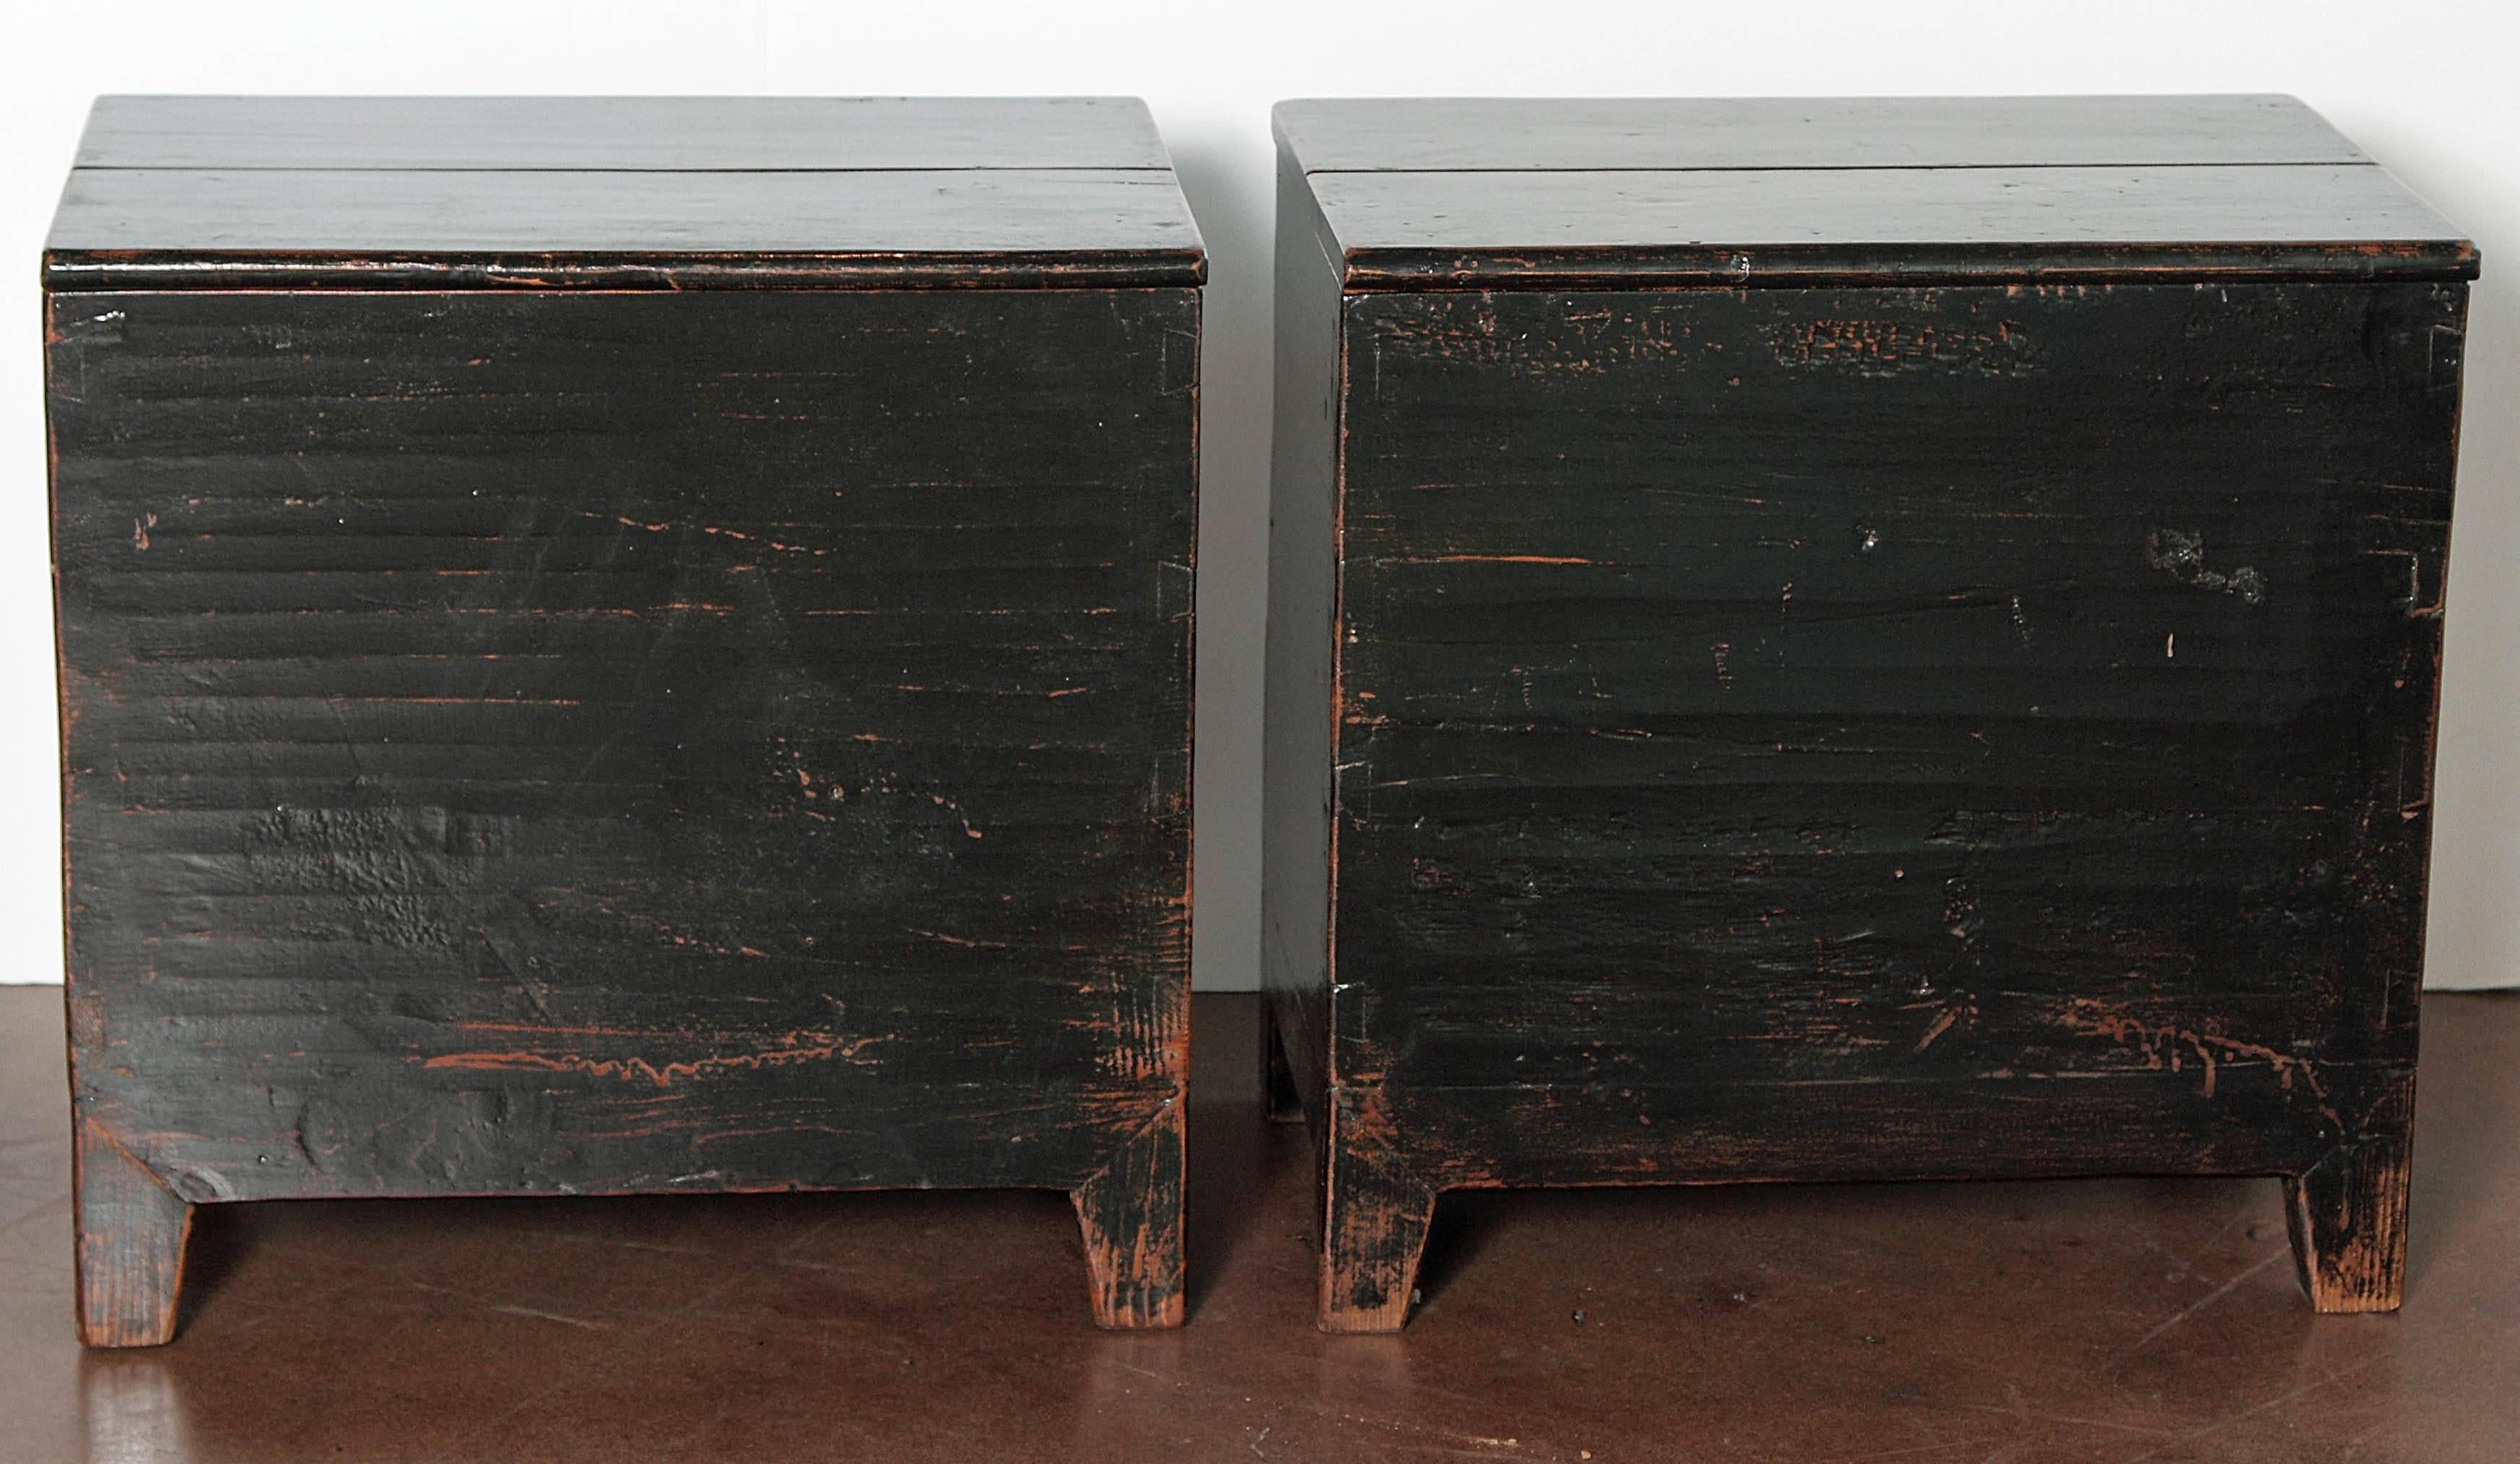 Oriental antique lift top end tables.
Antique, wax to show shine to the natural patina on elm.
Lift top can come apart for each slide and open and close.

Can be used as end table, storage bins or as trunk side tables.
Great condition. Each